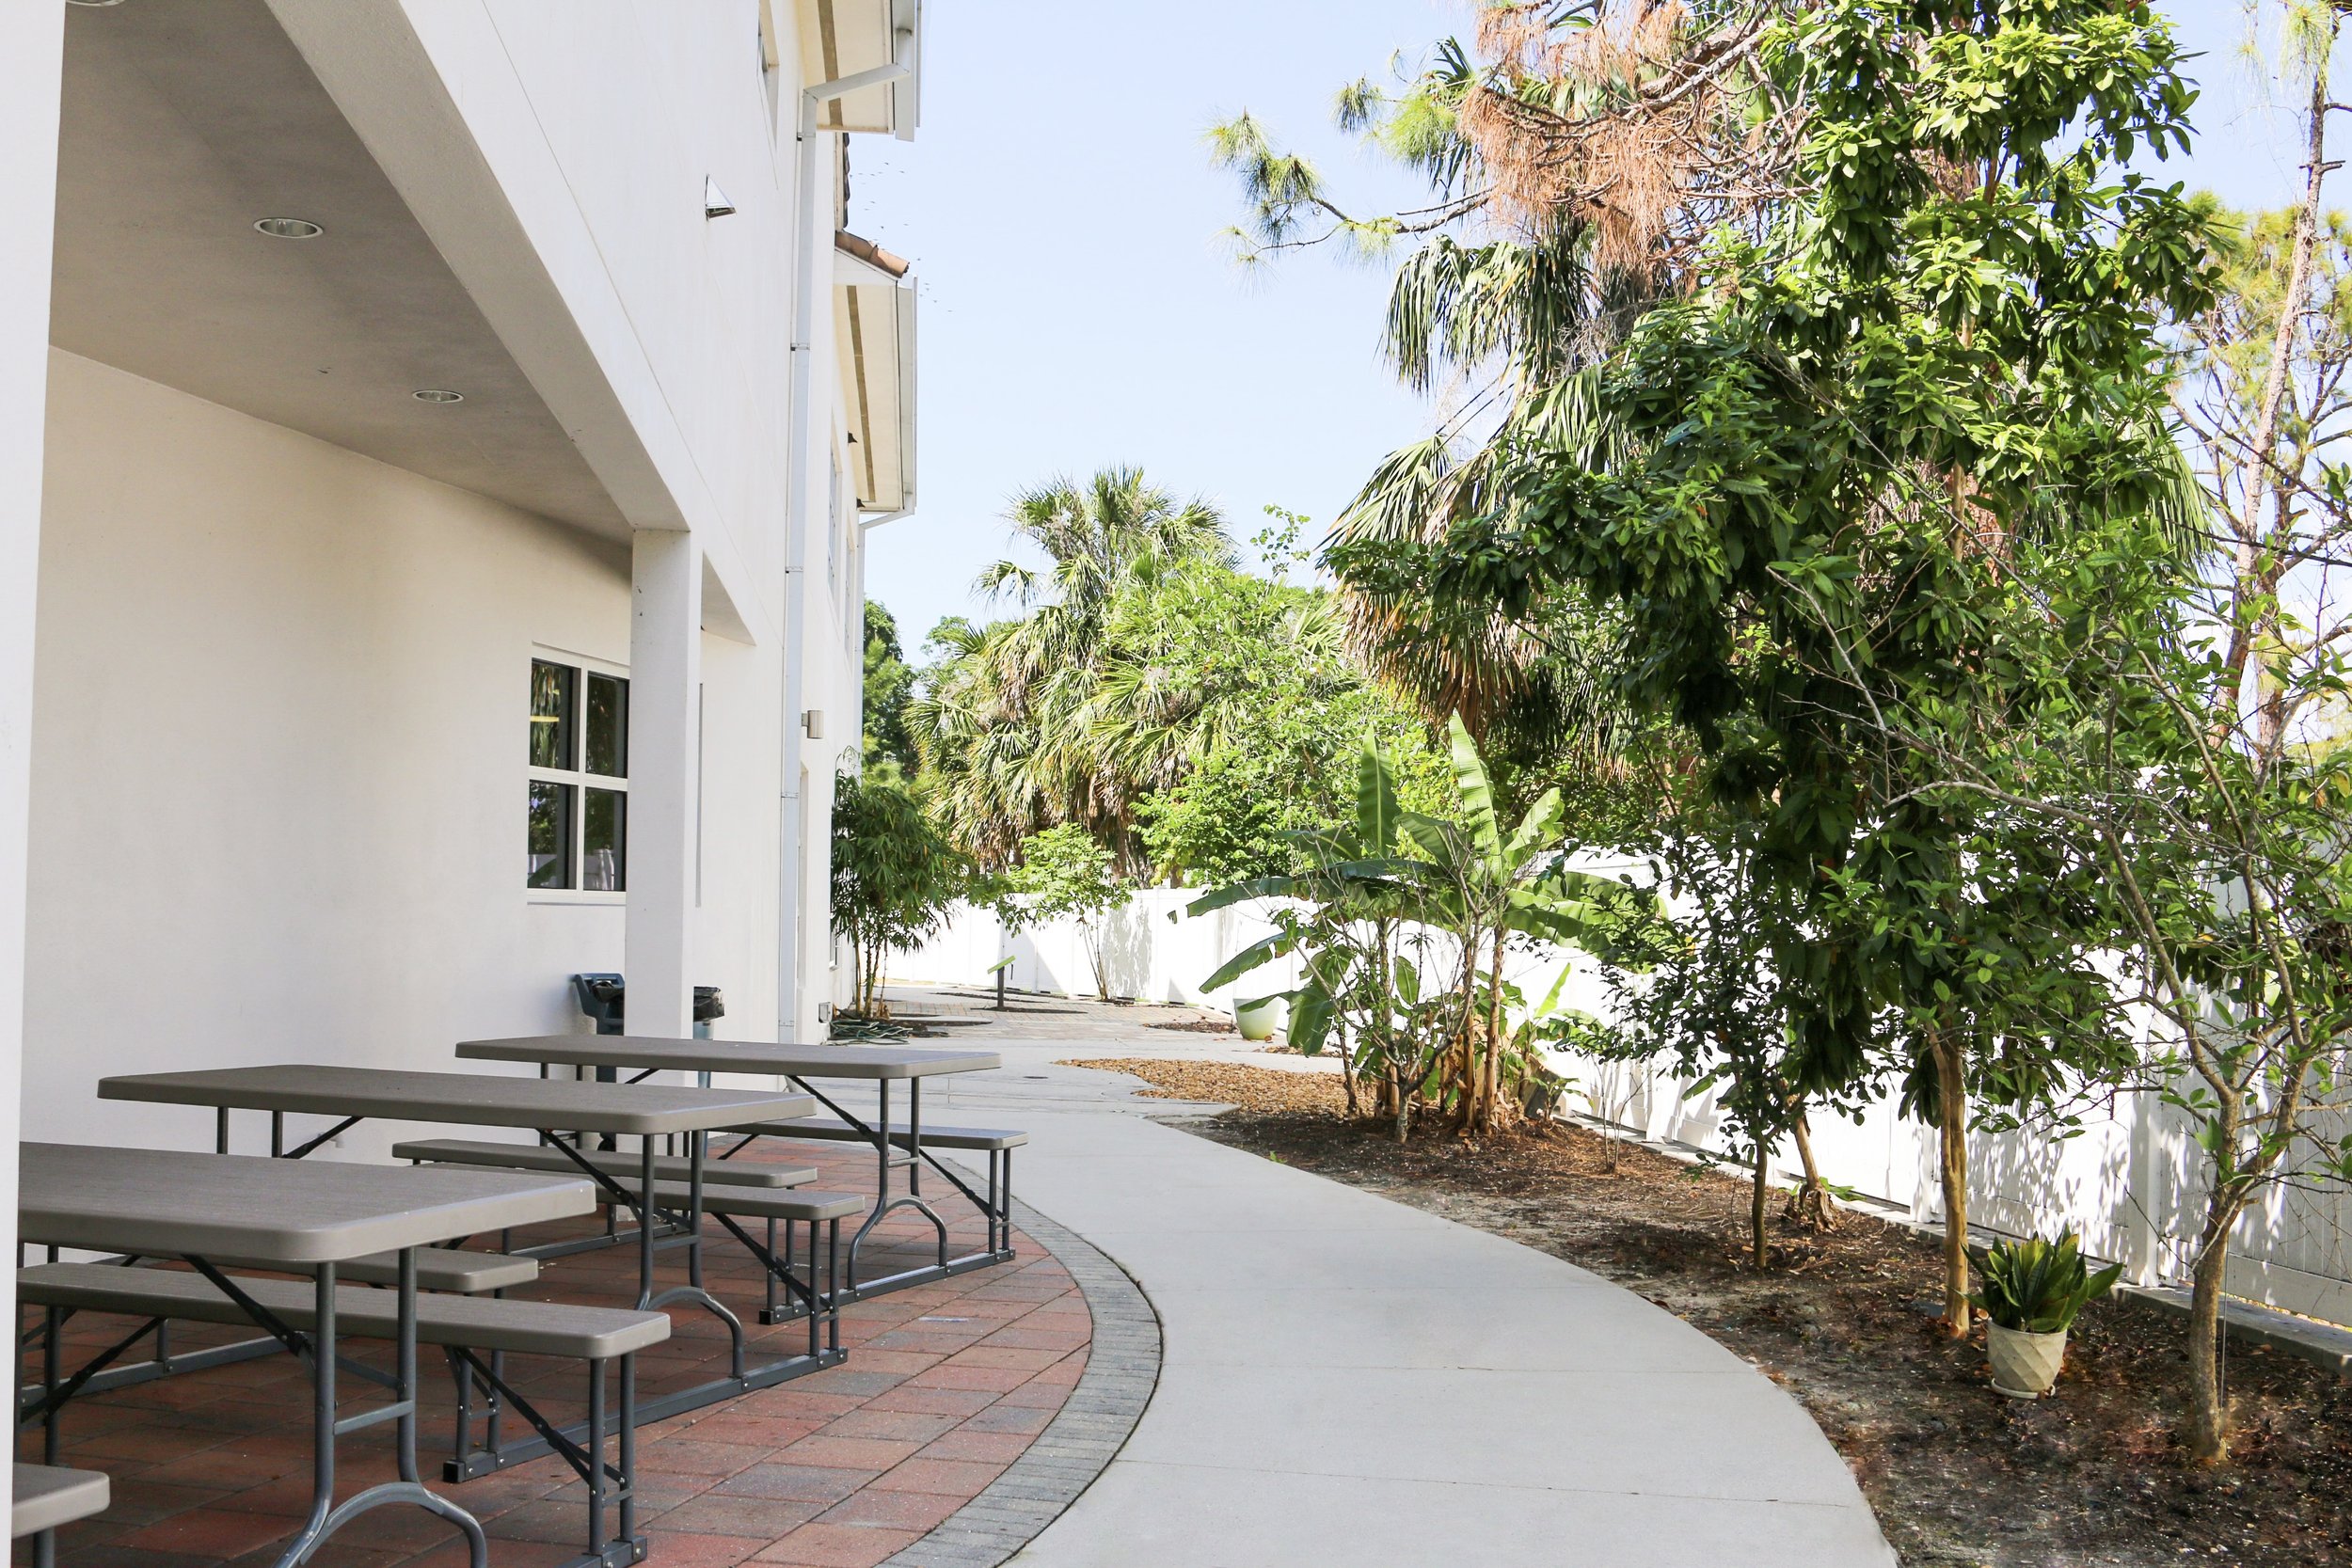 Outdoor Seating at North Campus in Estero, Florida - Campus Tour of Educational Pathways Academy, School for Dyslexia in Florida.jpeg